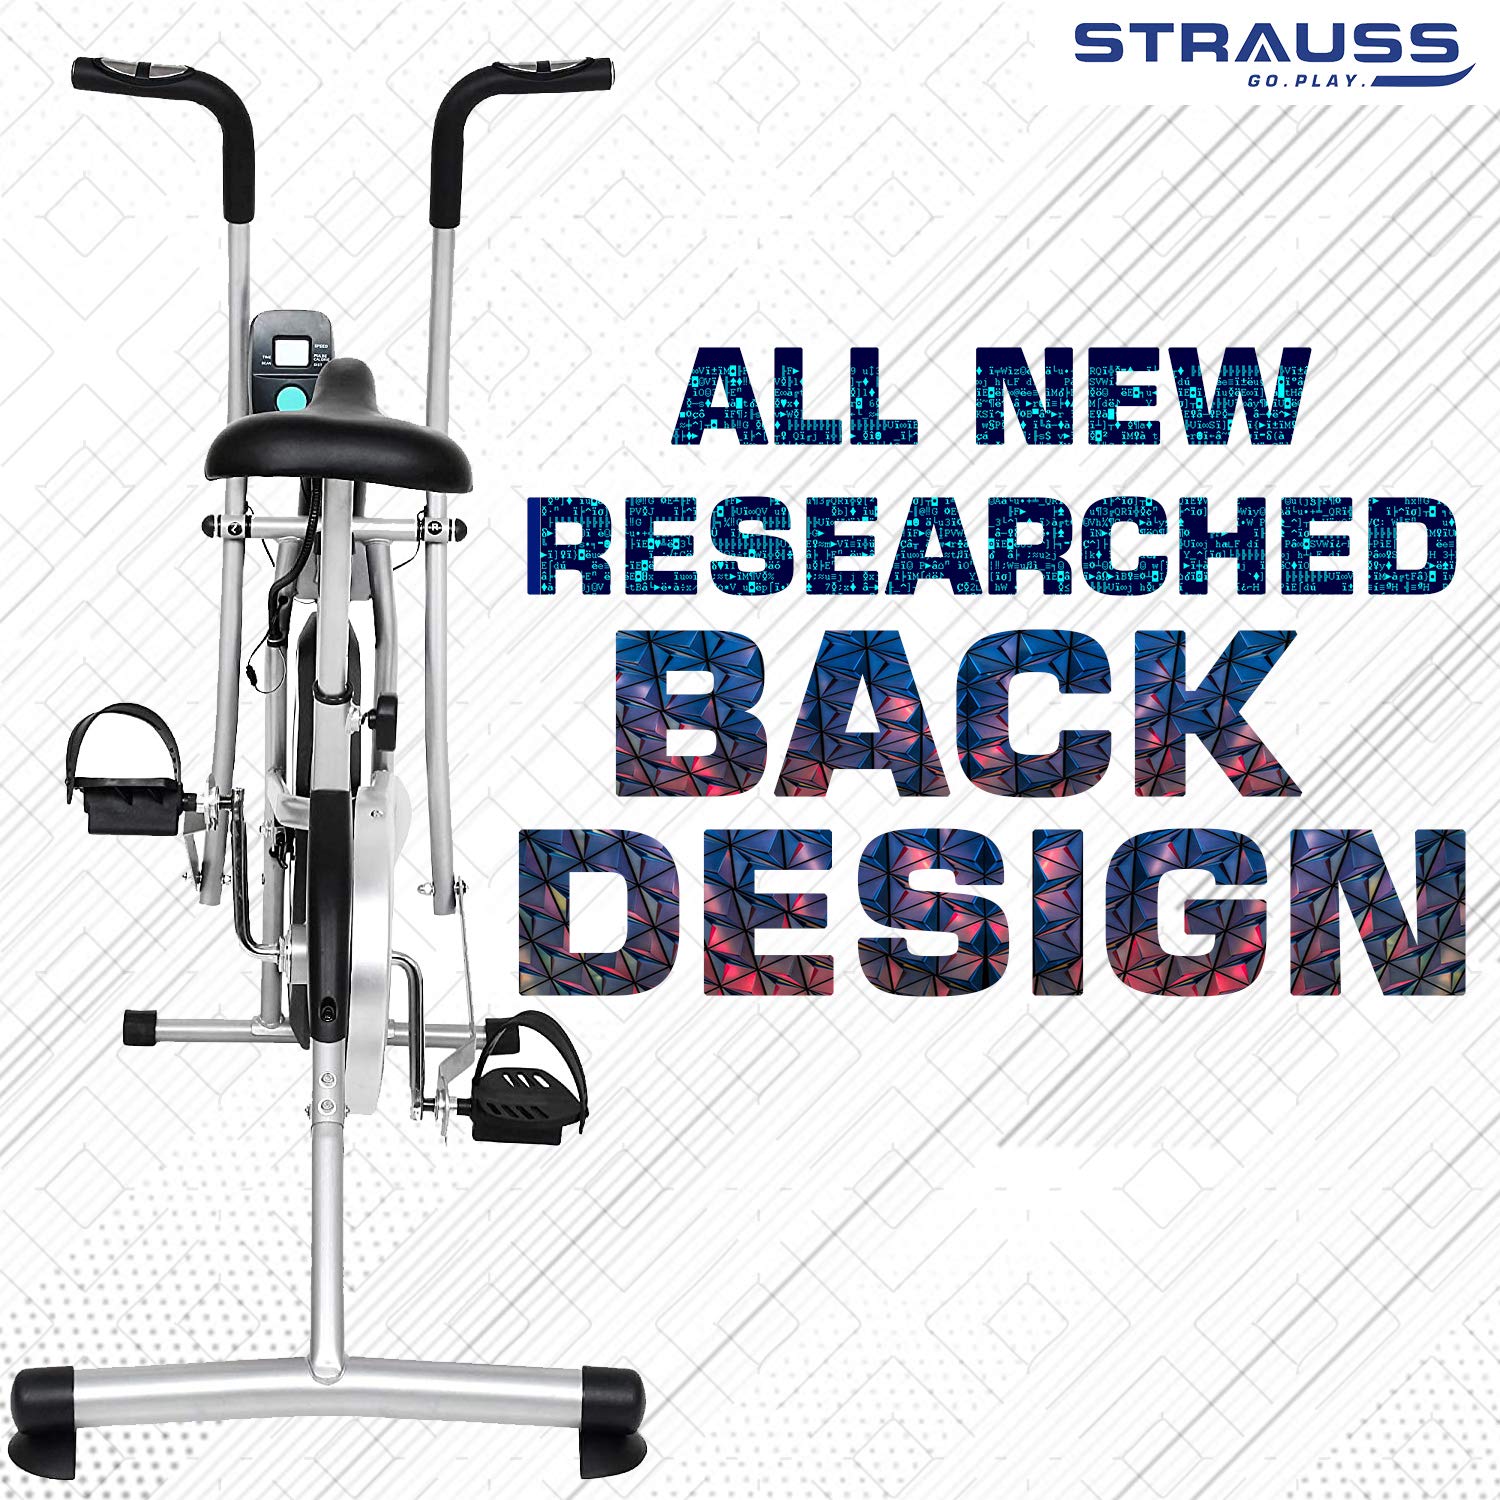 Strauss Exercise Air Bike With LCD Display